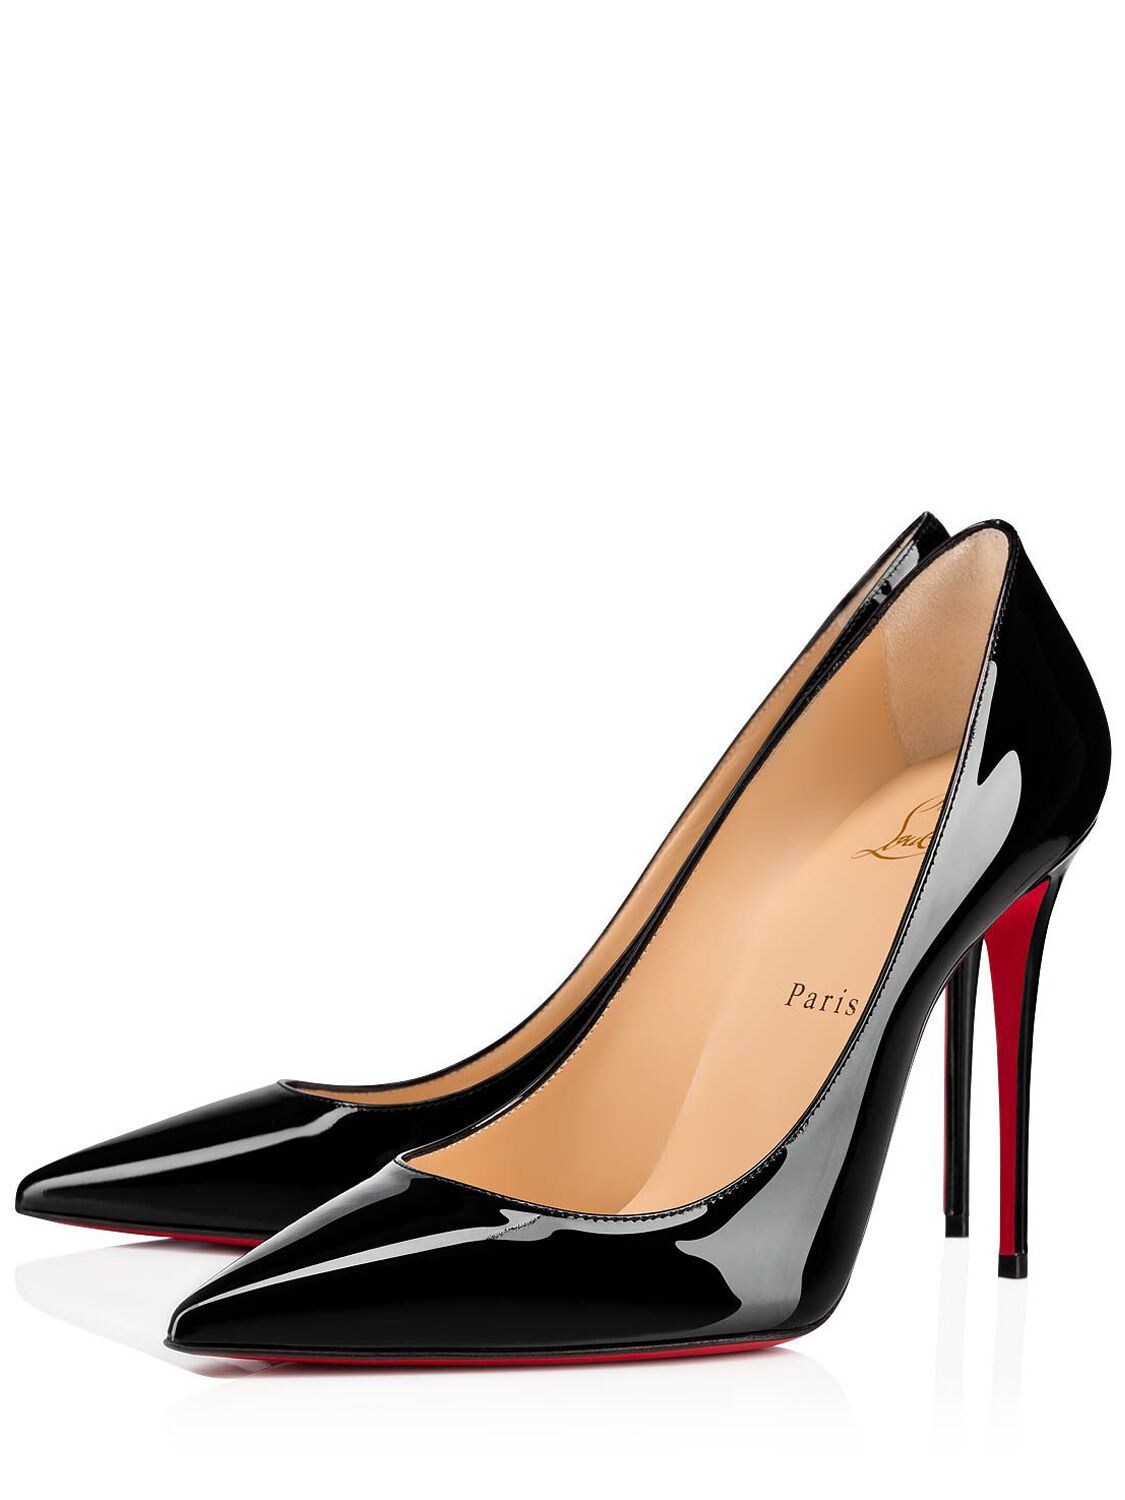 CHRISTIAN LOUBOUTIN 100mm Kate Patent Leather Pumps